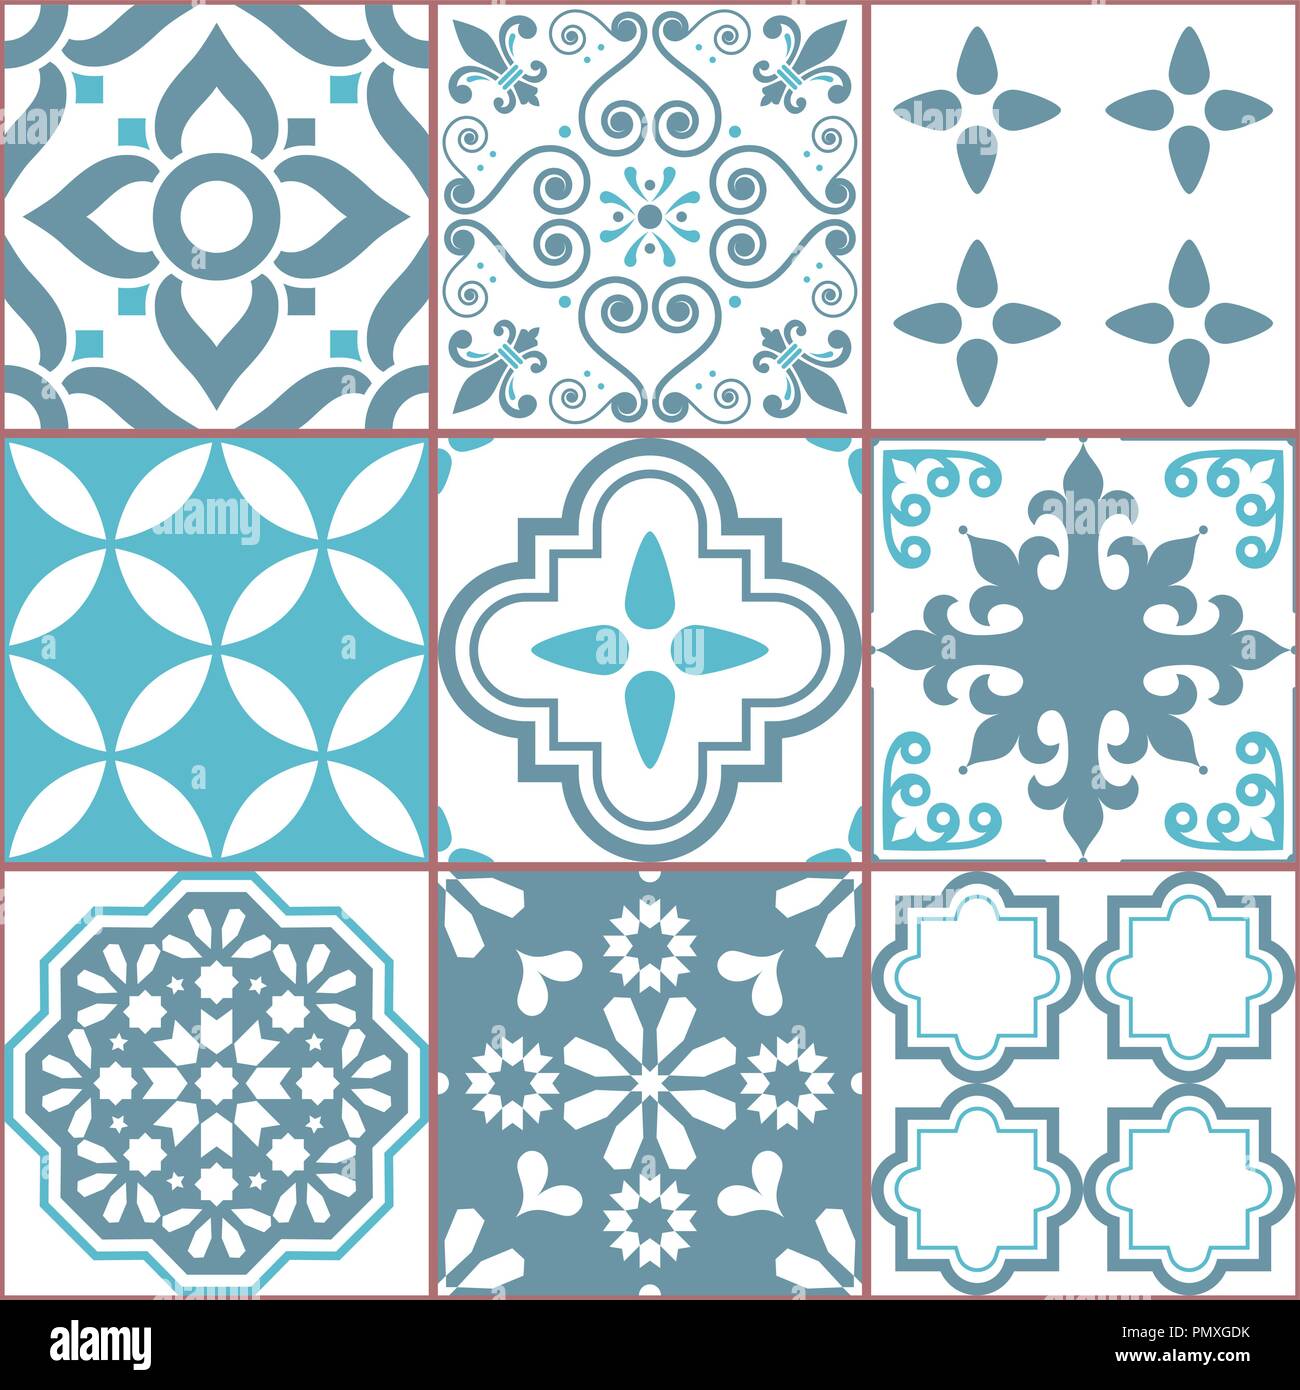 Tile vector seamless Azlejos pattern, Spanish or Portuguese mosaic in turquoise and gray, abstract and floral designs. Ornamental textile background. Stock Vector